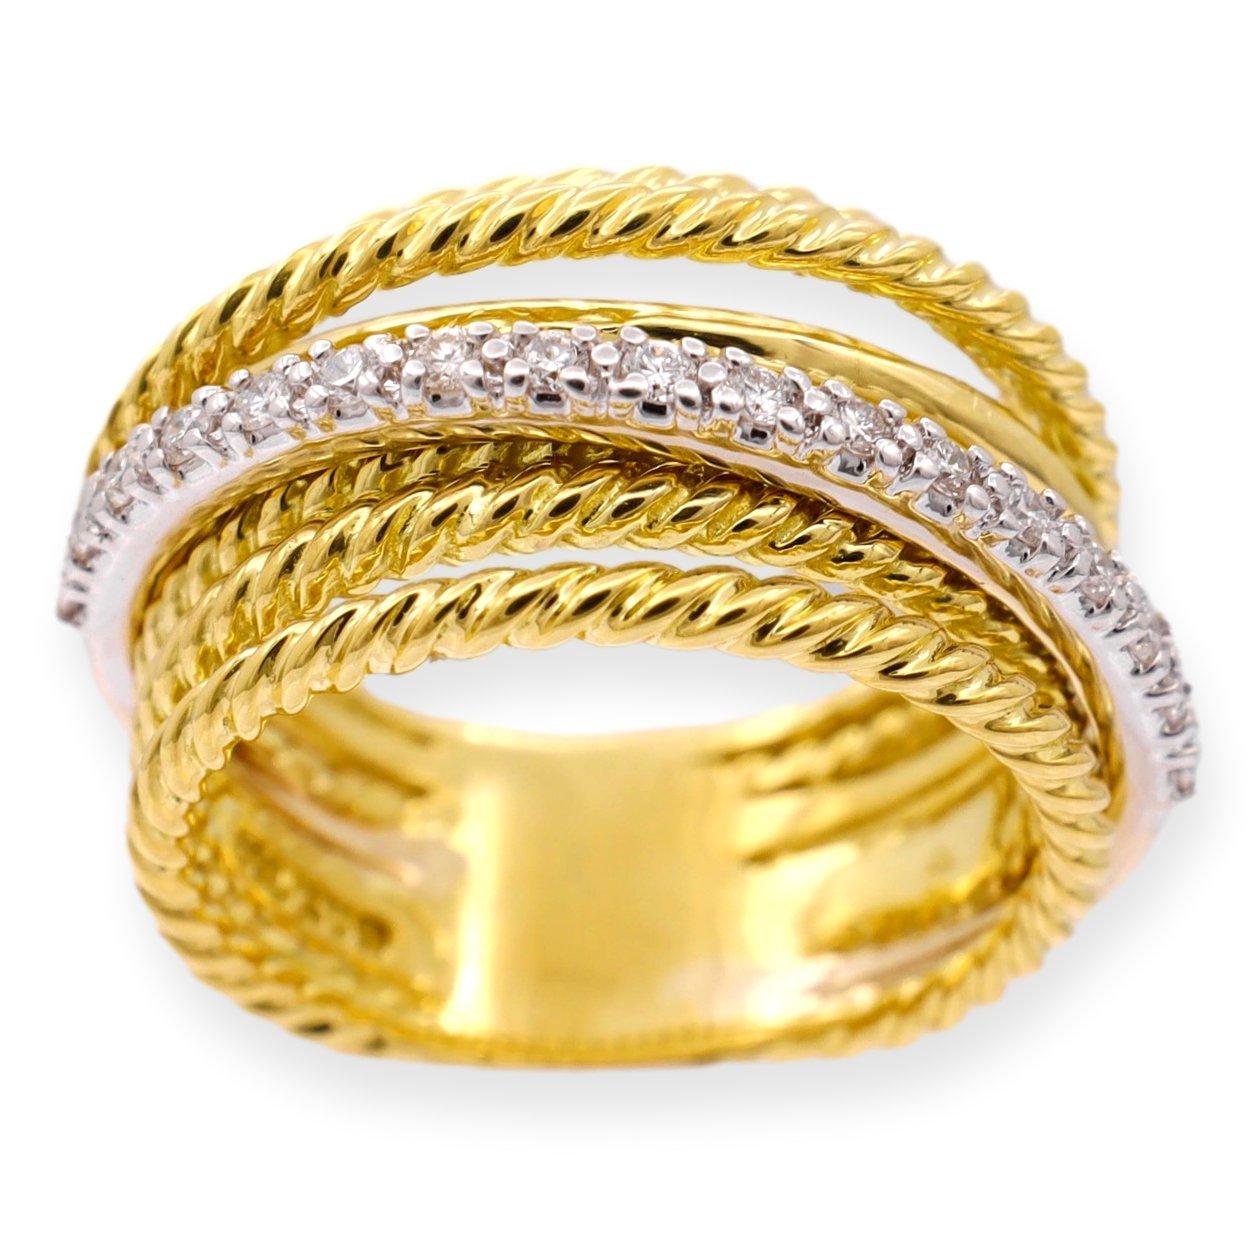 David Yurman Wide Band Ring from the captivating Crossover collection finely crafted in lustrous 18K yellow gold, this stunning piece showcases a harmonious fusion of design elements. The ring boasts seven rows of the signature cable rings, a